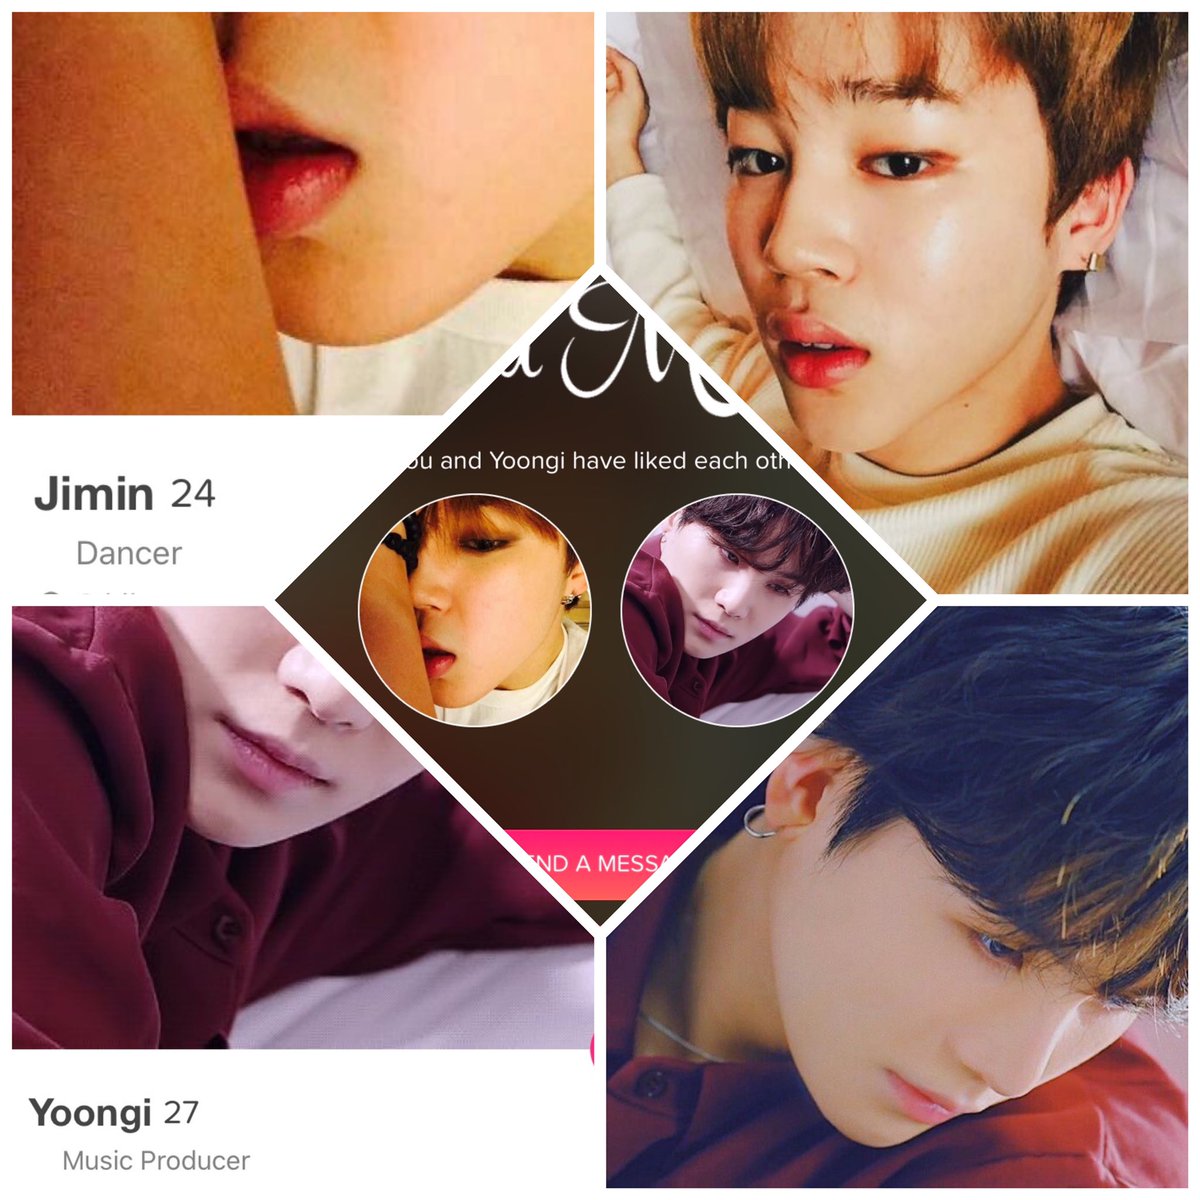 Yoonmin DTF AUJimin, notorious for his one night stands, comes across Yoongi’s profile on a dating app and swipes right, expecting his friend to swipe left. When Yoongi surprises Jimin by being DTF, he has to confront his feelings for Yoongi face on instead of avoiding them.